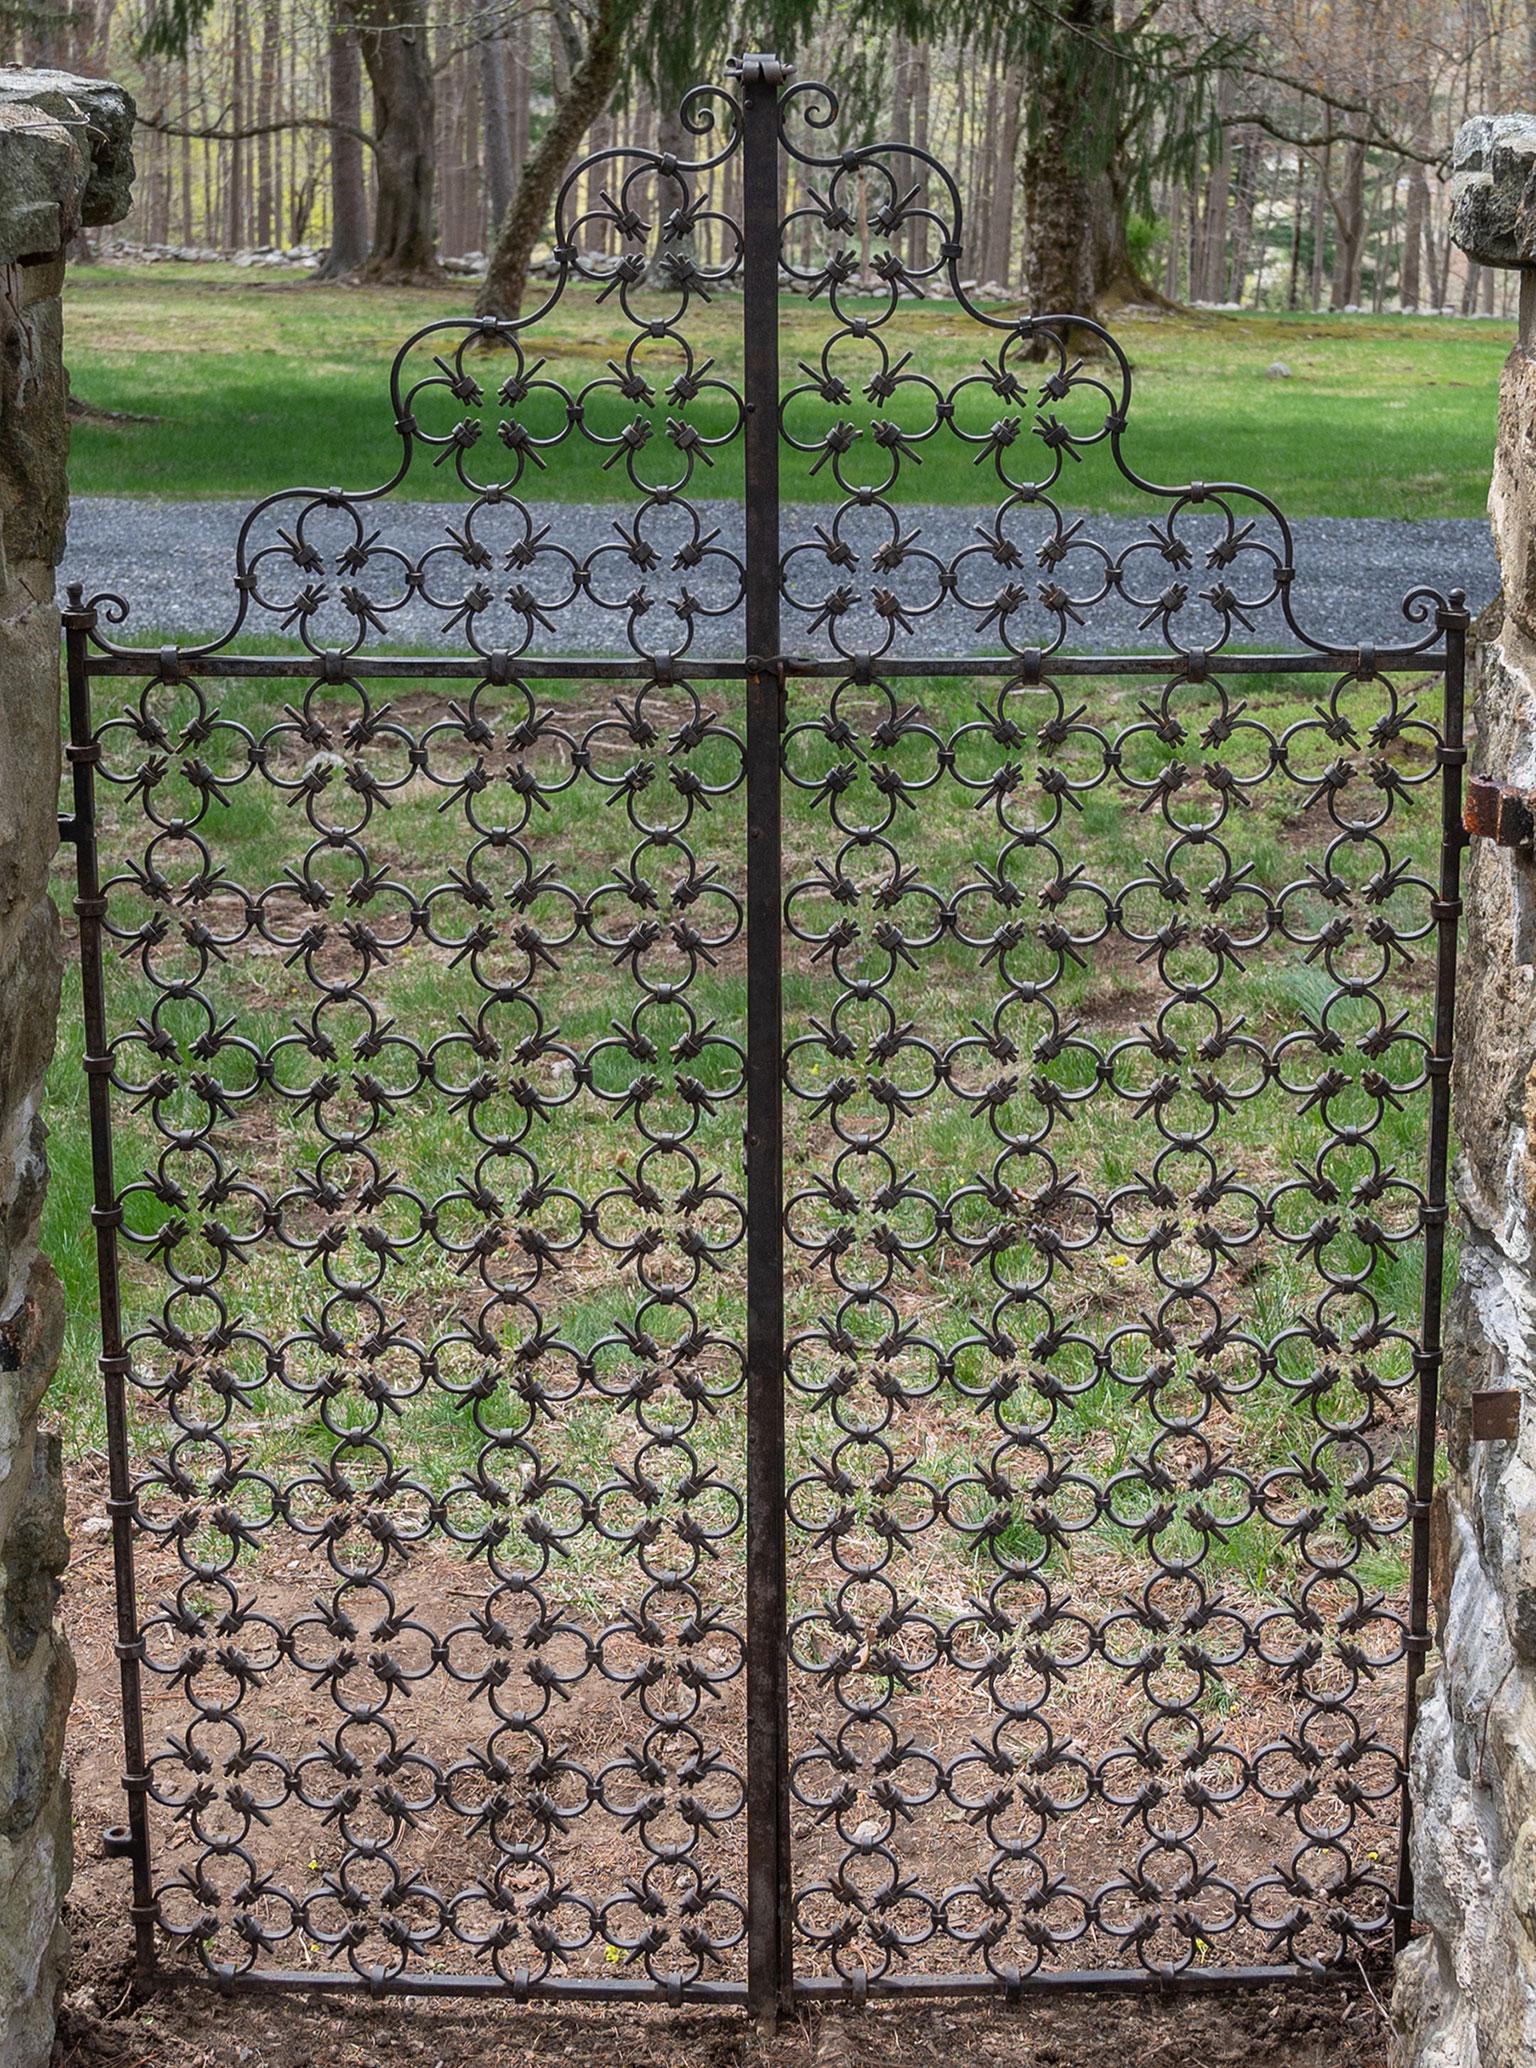 A fine pair of wrought-iron gates in the style of Samuel Yellin, with all-over quatrefoil motif and scalloped top edge, American, ca. 1900. Measures: 68 ins. high overall, 46 ins. wide overall.